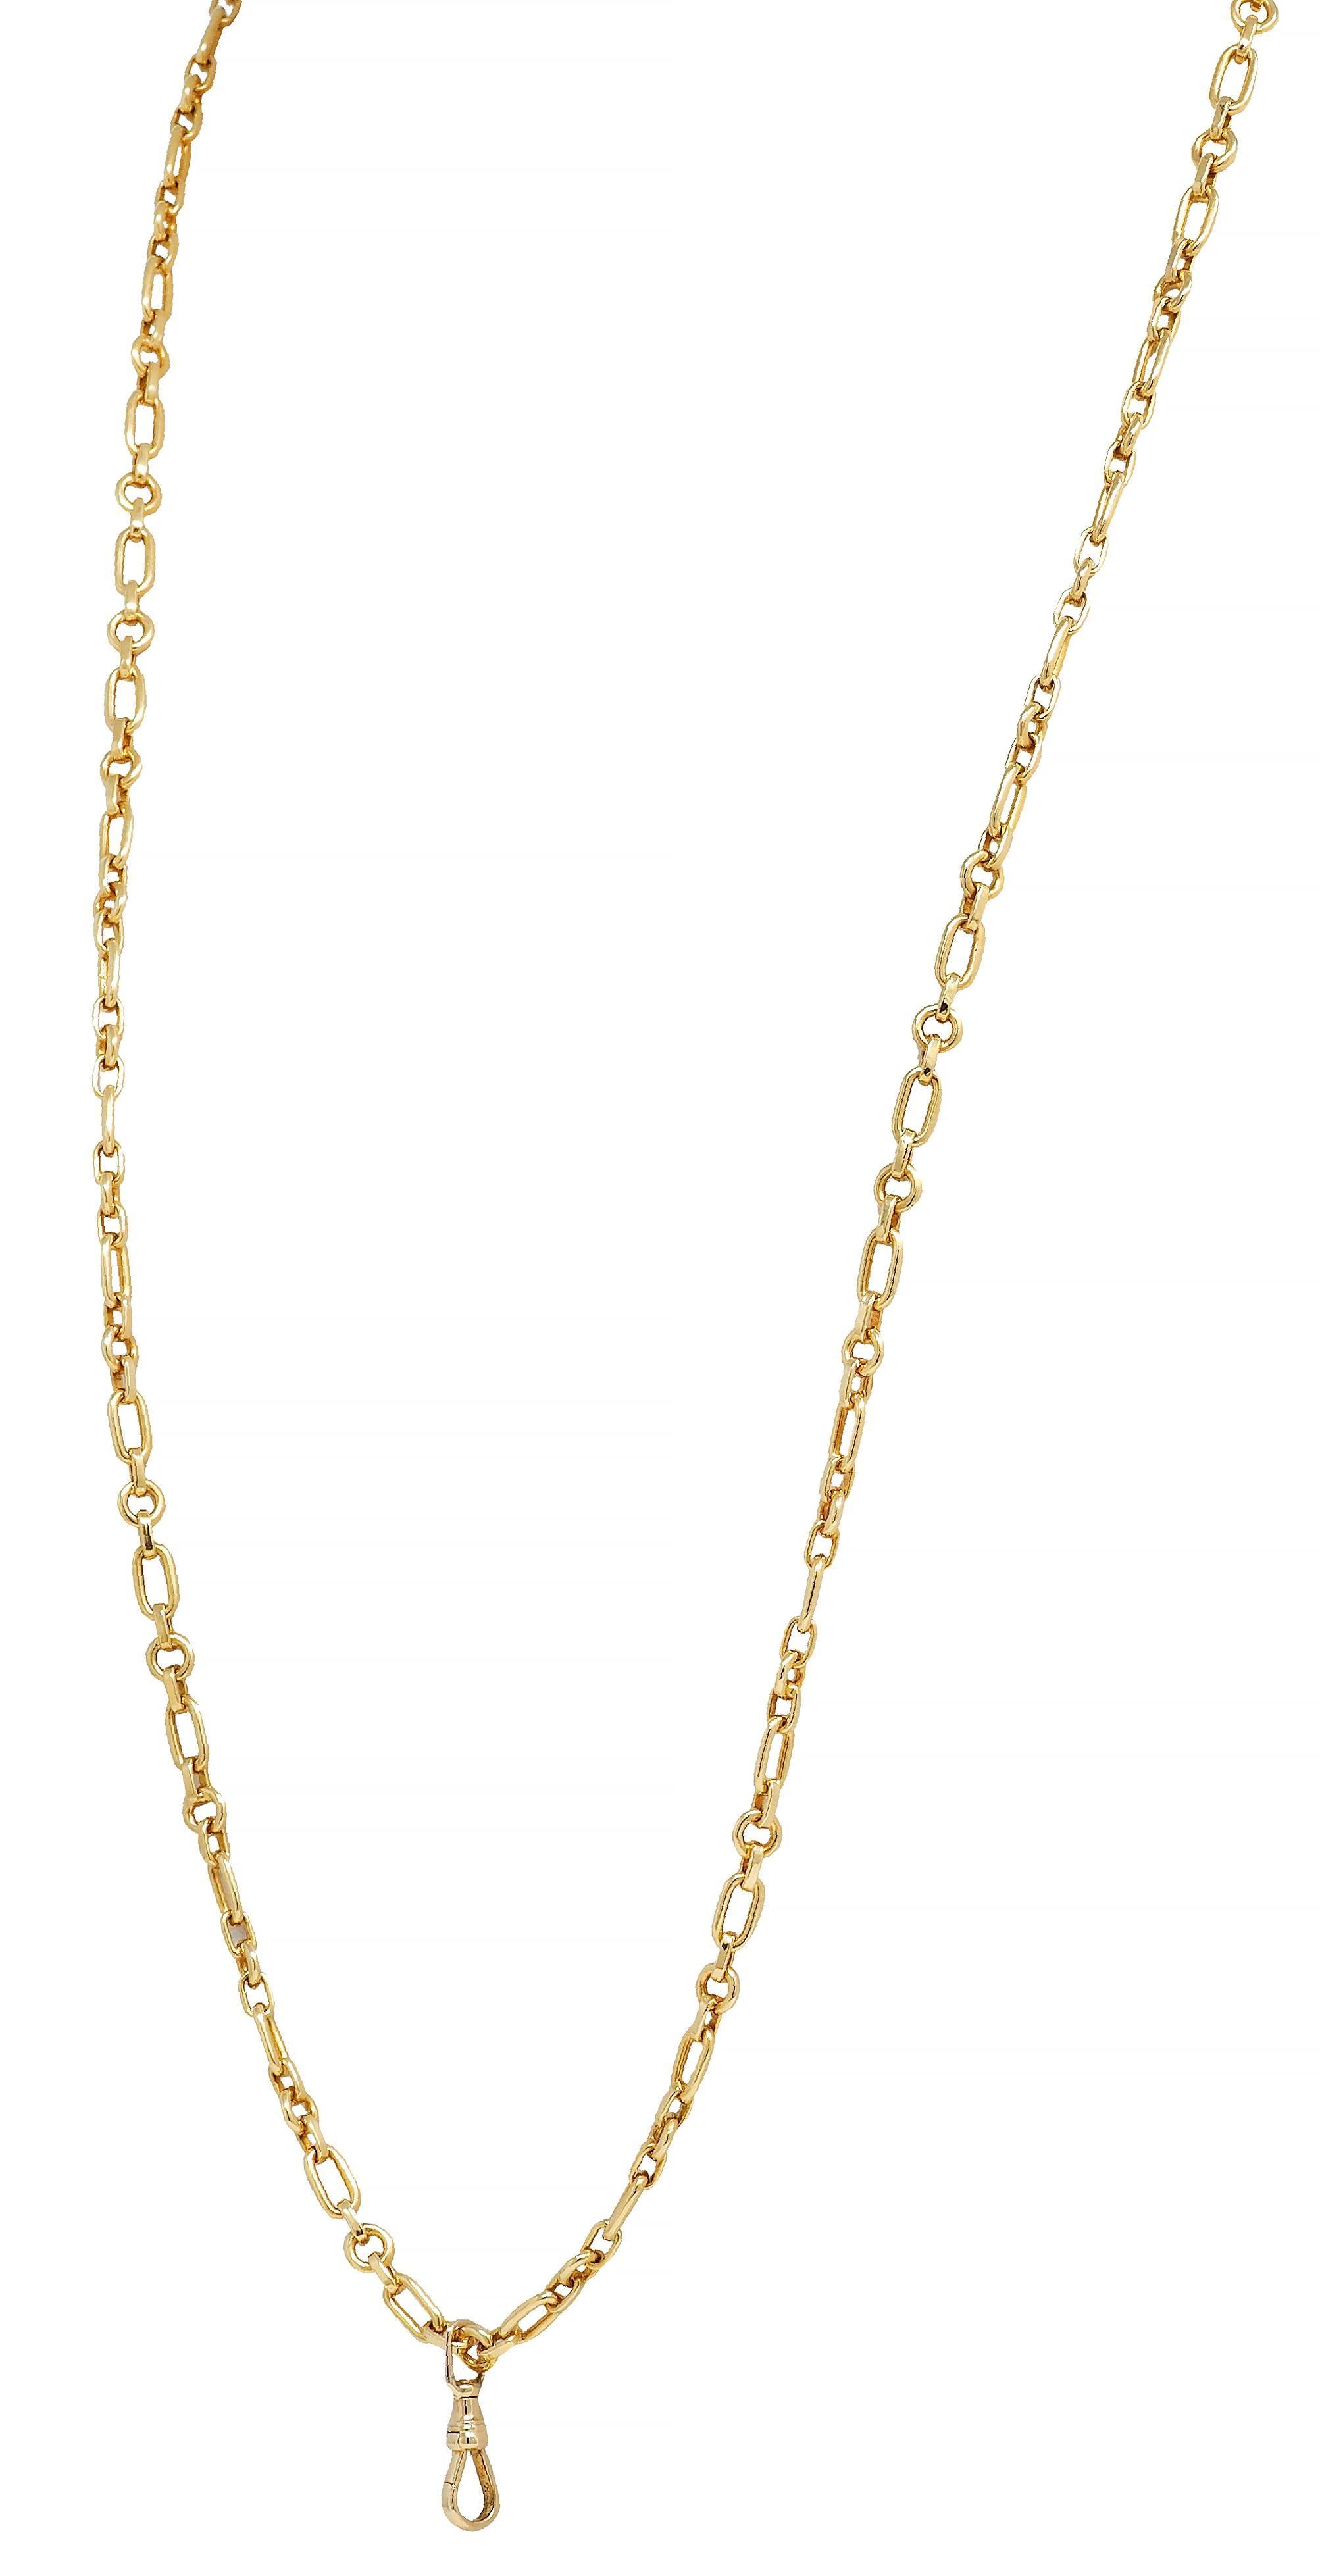 Vintage 18 Karat Yellow Gold Fancy Paperclip Link Chain Necklace 1